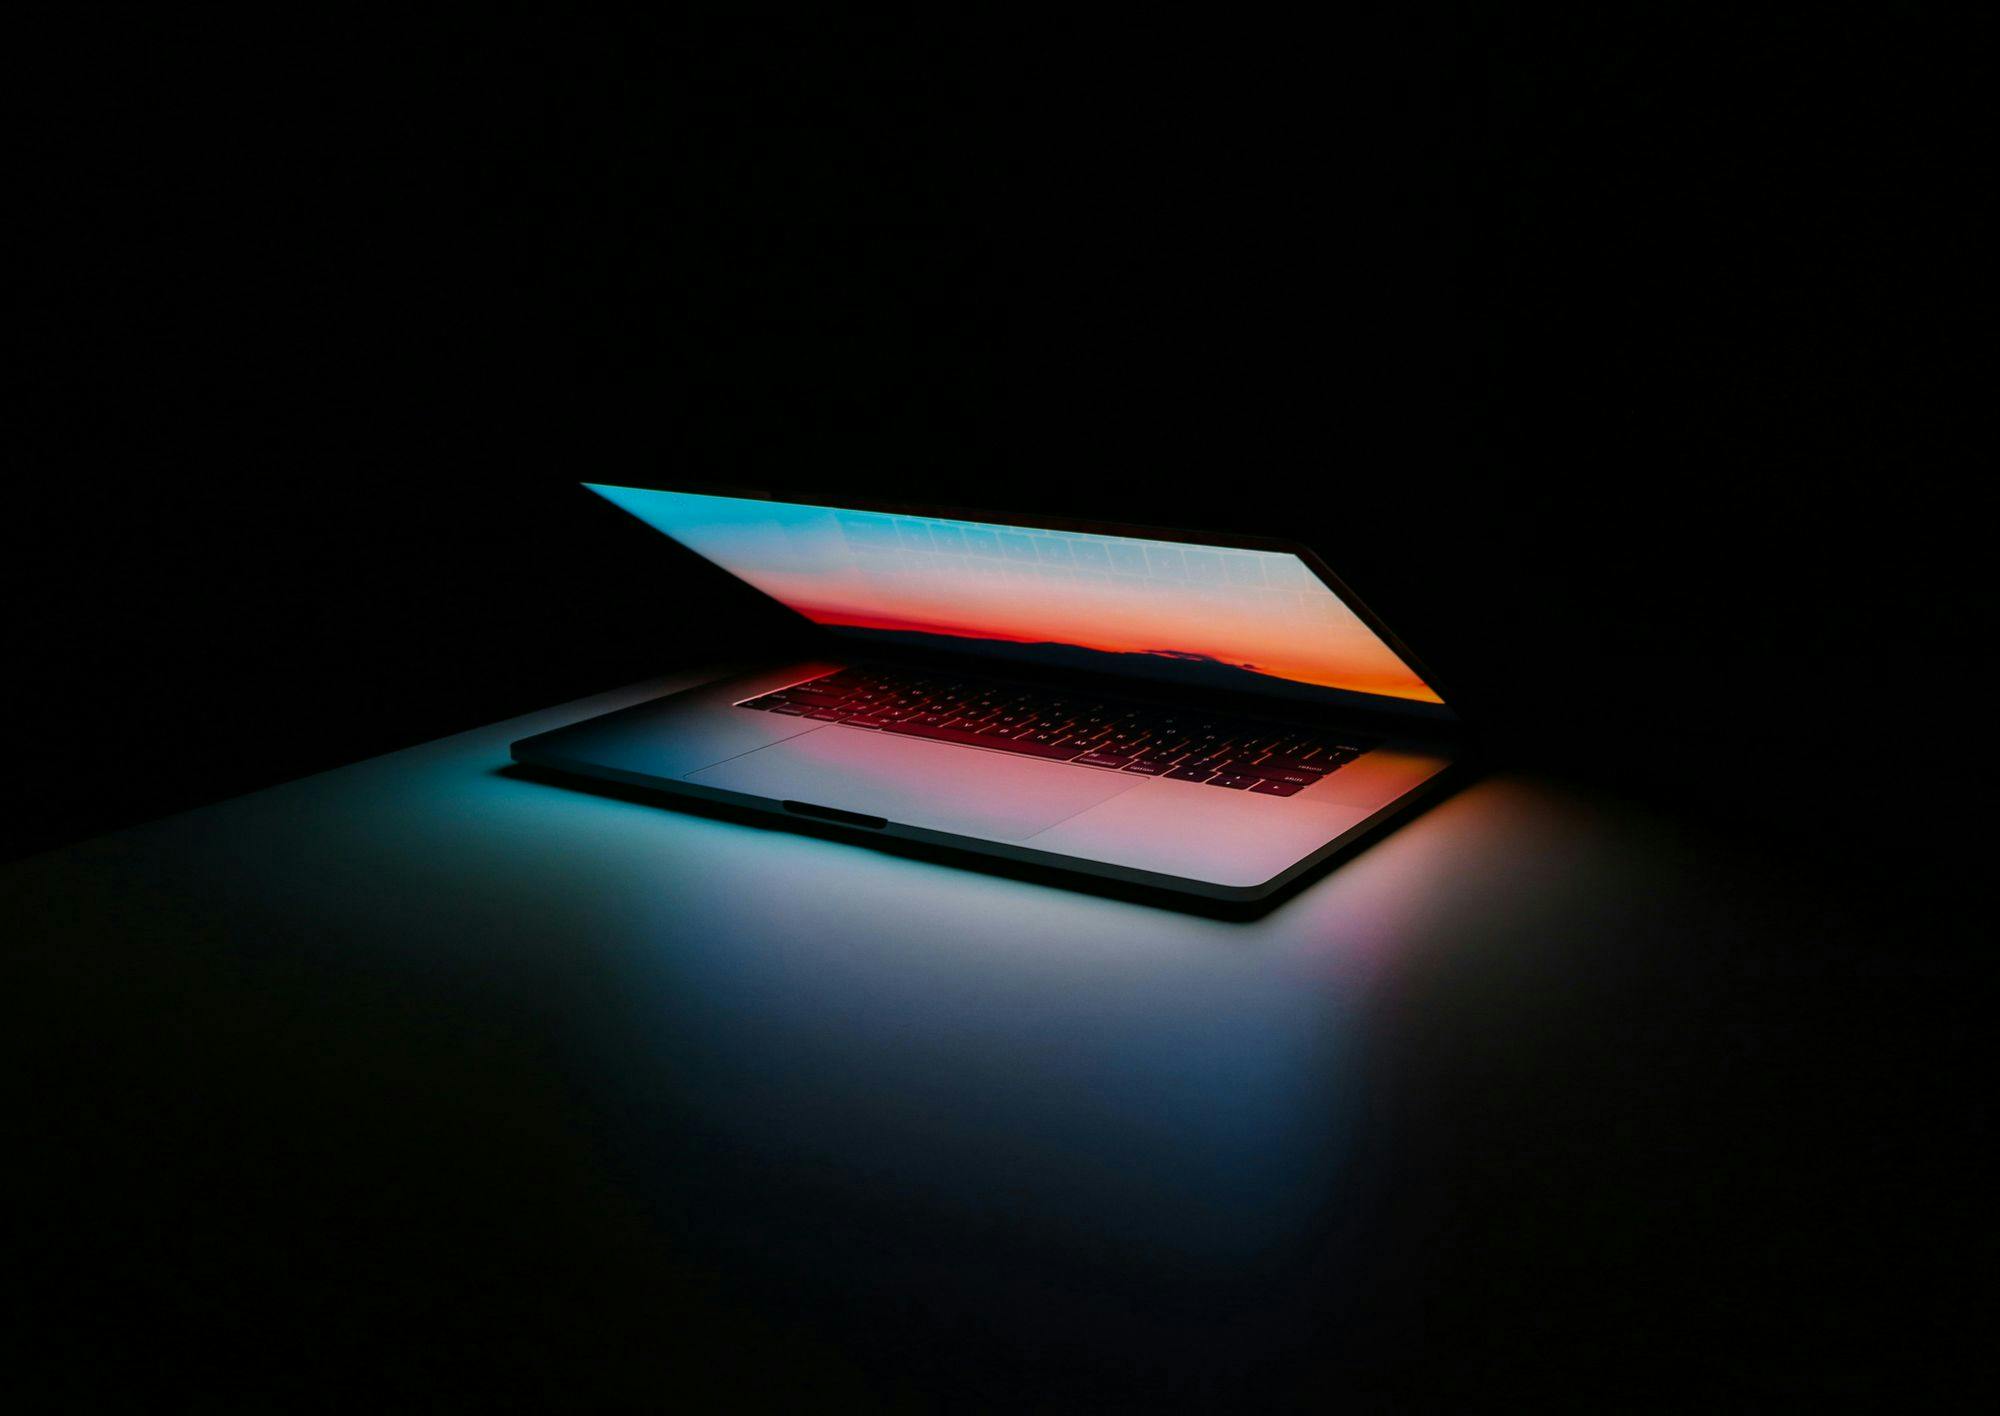 A modern laptop with a colorful backlit keyboard, emitting neon blue and orange hues in a dark environment, giving it a futuristic and sleek appearance.